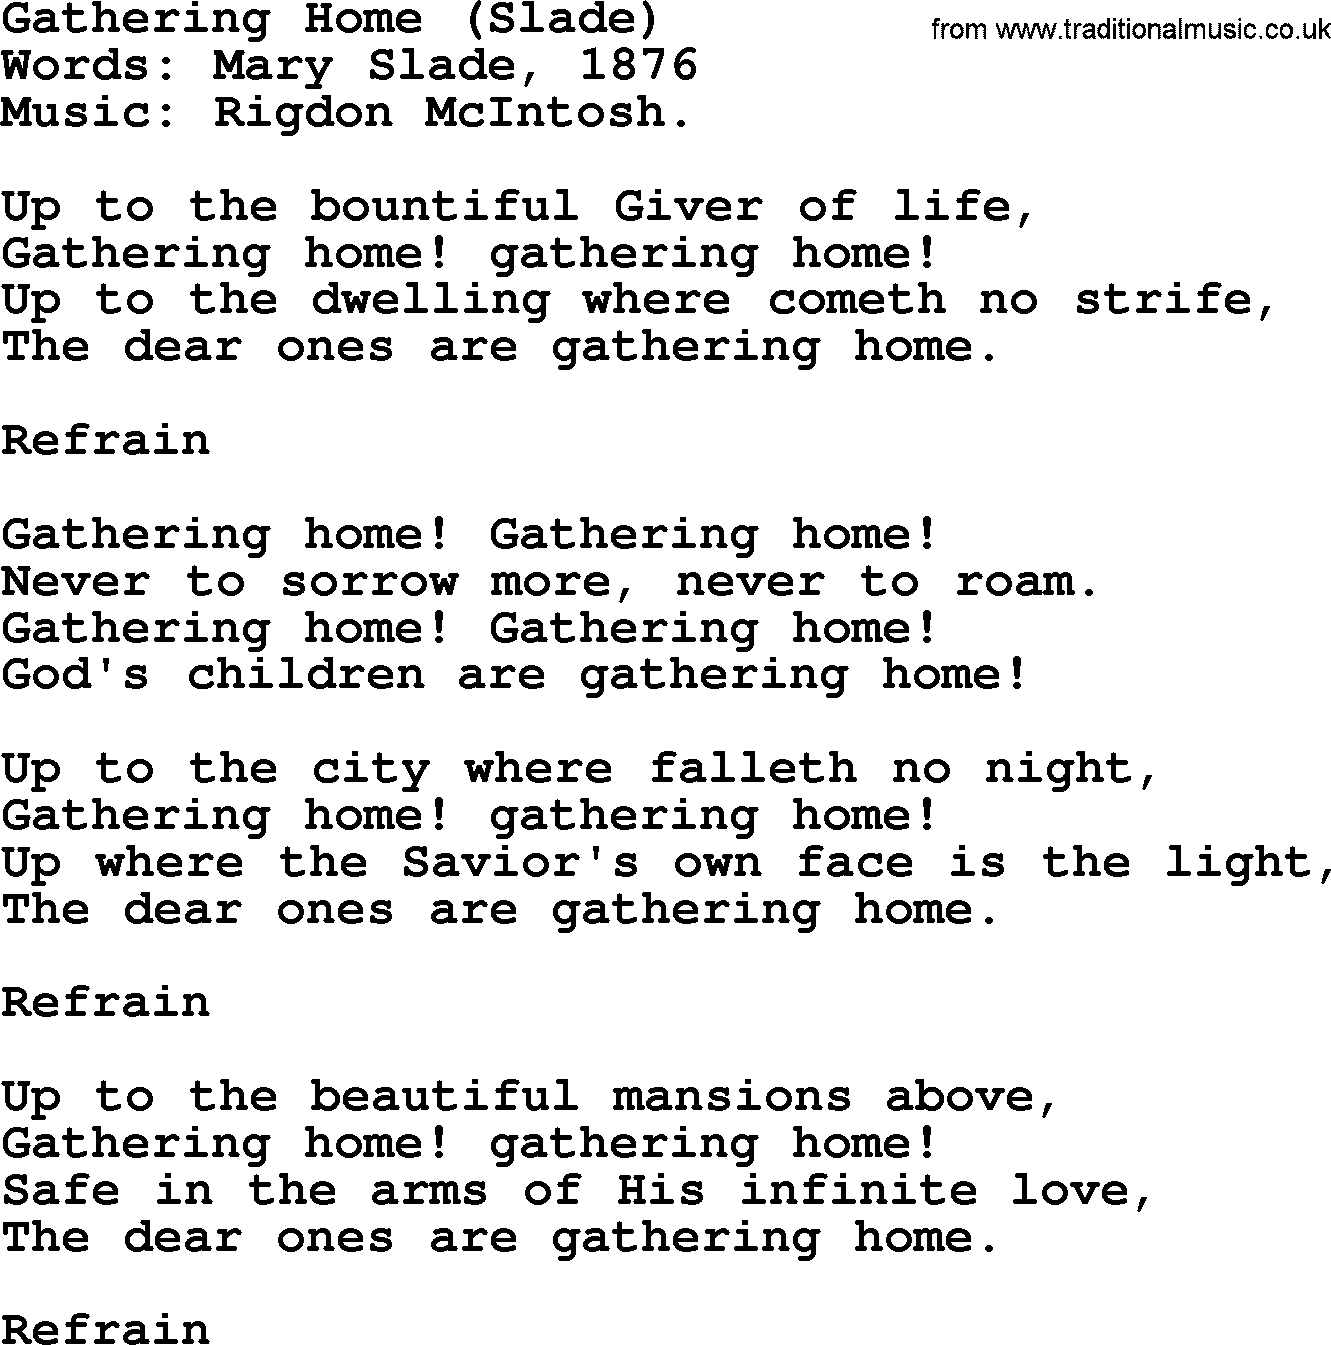 Songs and Hymns about Heaven: Gathering Home (slade) lyrics with PDF